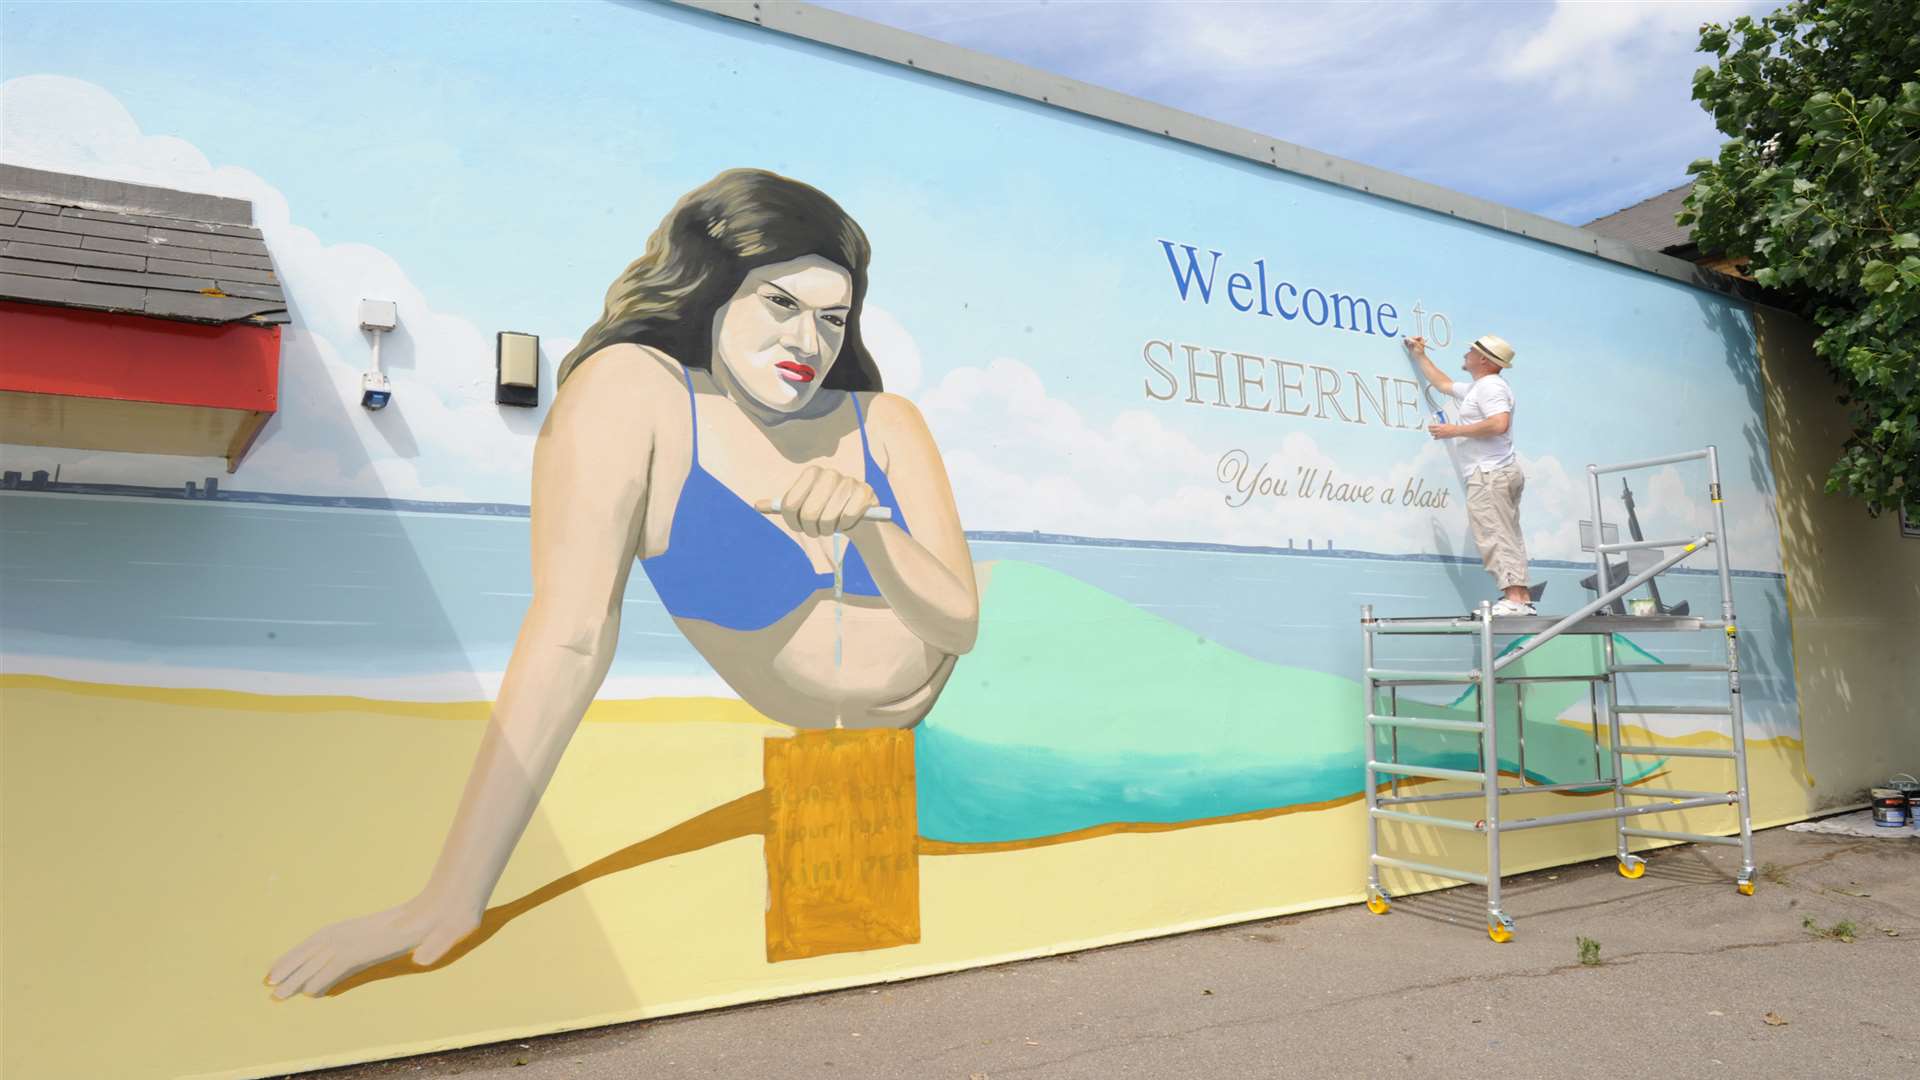 The controversial mermaid mural